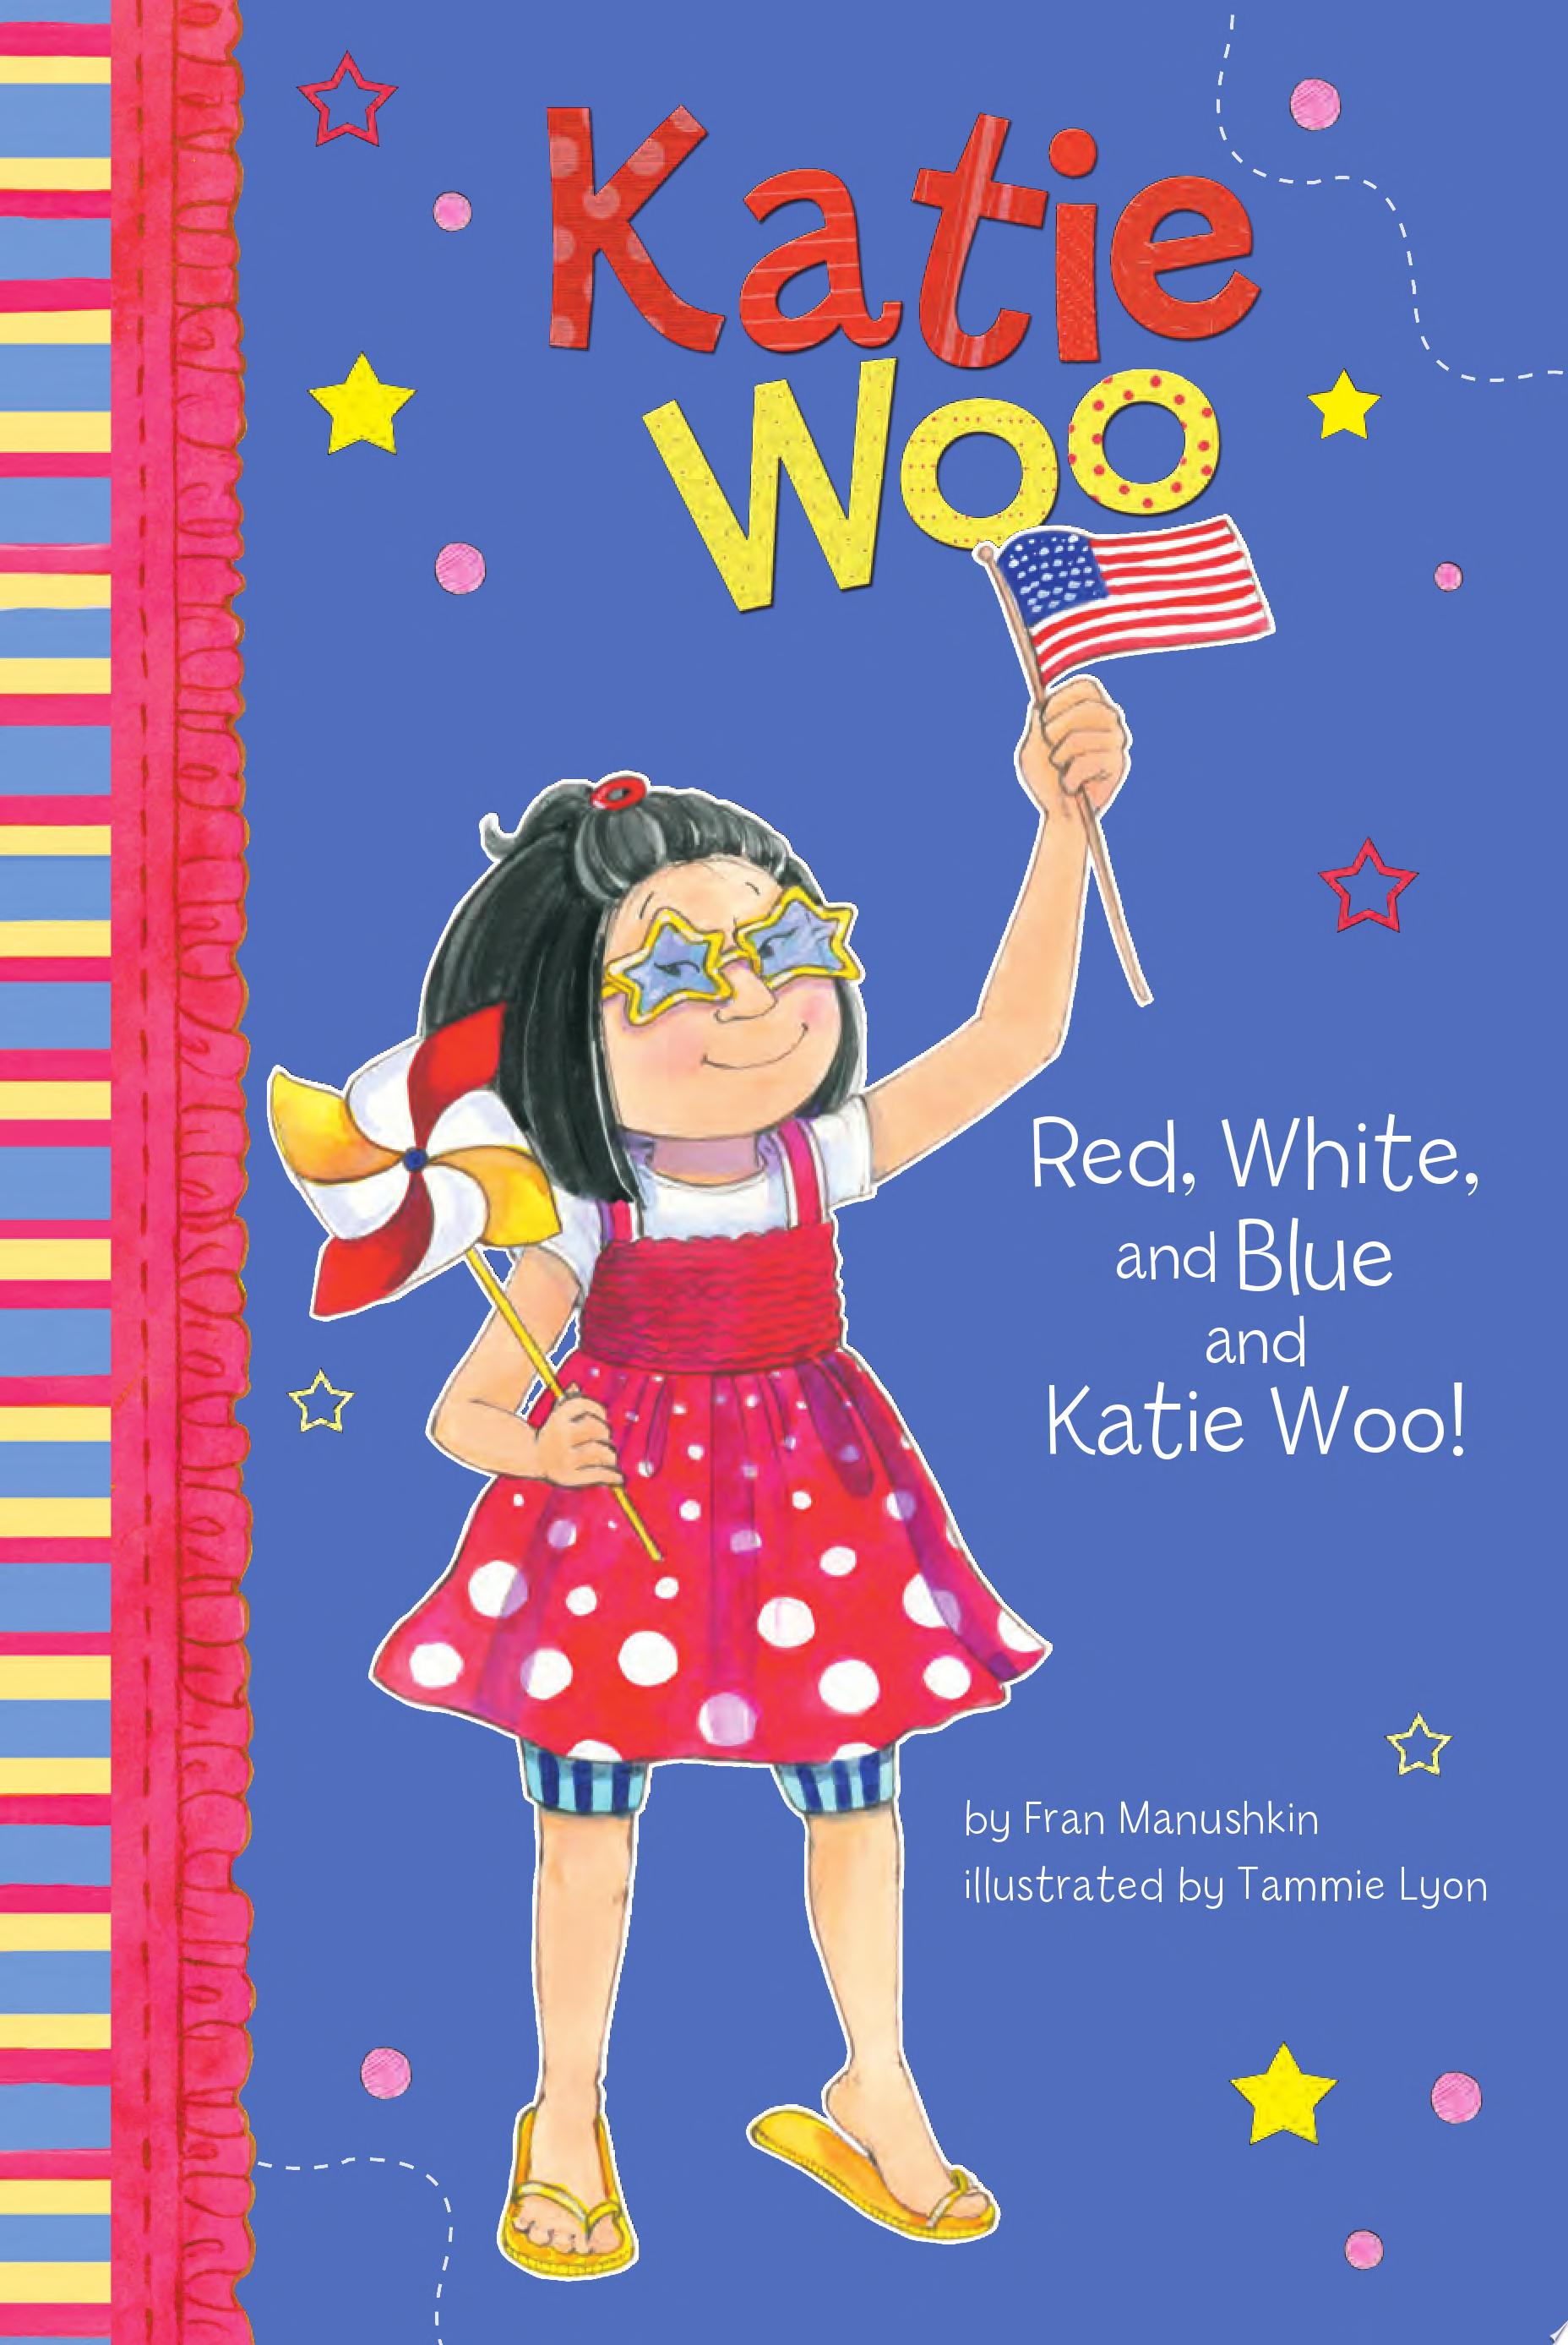 Image for "Red, White, and Blue and Katie Woo"